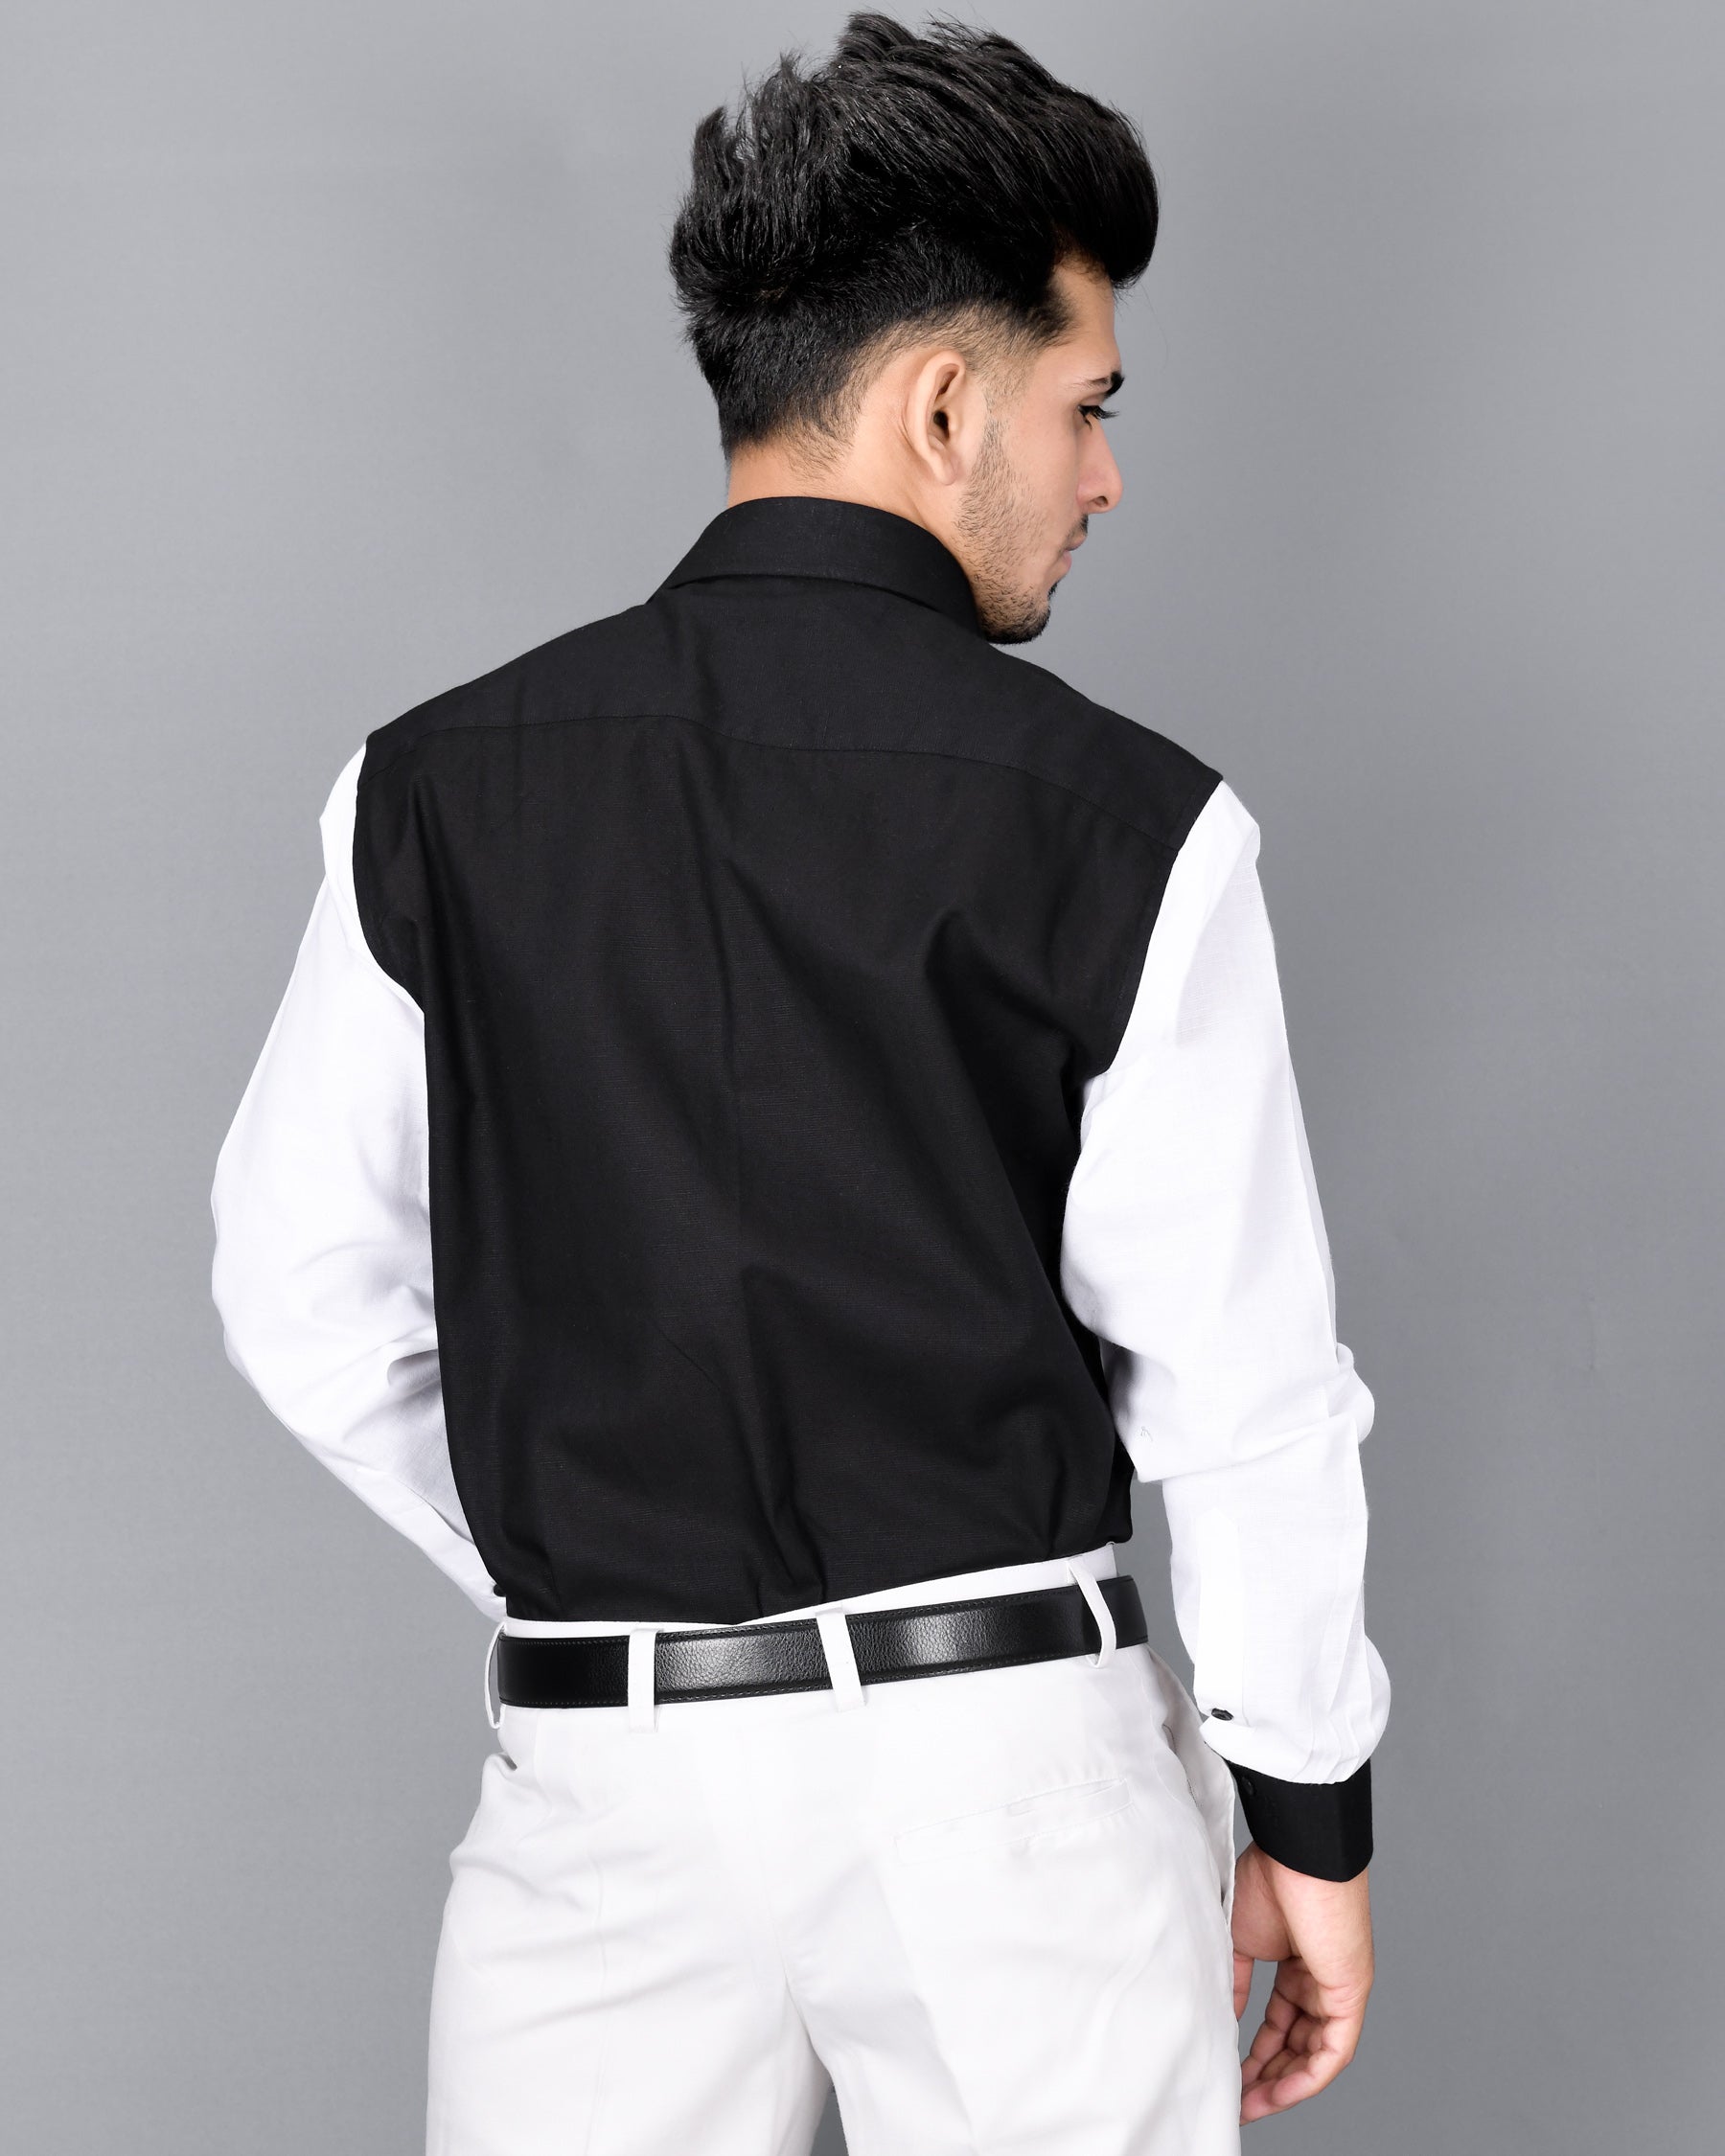 Jade Black with White Patterned Luxurious Linen Shirt 3718BLK-P23-38, 3718BLK-P23-H-38, 3718BLK-P23-39, 3718BLK-P23-H-39, 3718BLK-P23-40, 3718BLK-P23-H-40, 3718BLK-P23-42, 3718BLK-P23-H-42, 3718BLK-P23-44, 3718BLK-P23-H-44, 3718BLK-P23-46, 3718BLK-P23-H-46, 3718BLK-P23-48, 3718BLK-P23-H-48, 3718BLK-P23-50, 3718BLK-P23-H-50, 3718BLK-P23-52, 3718BLK-P23-H-52